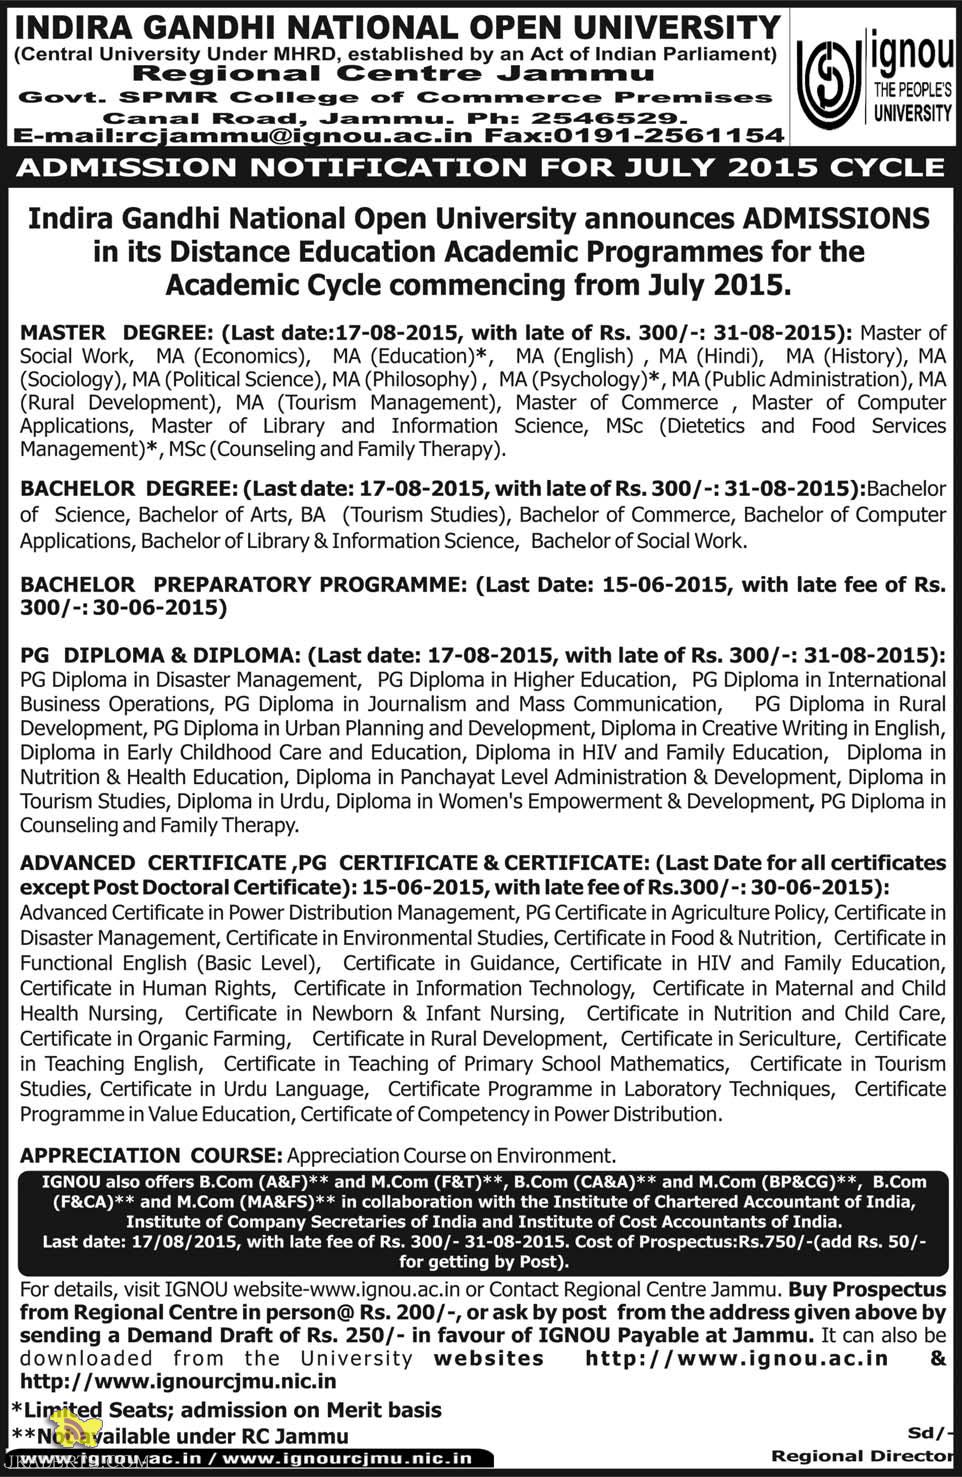 IGNOU ADMISSION NOTIFICATION FOR JULY 2015 CYCLE